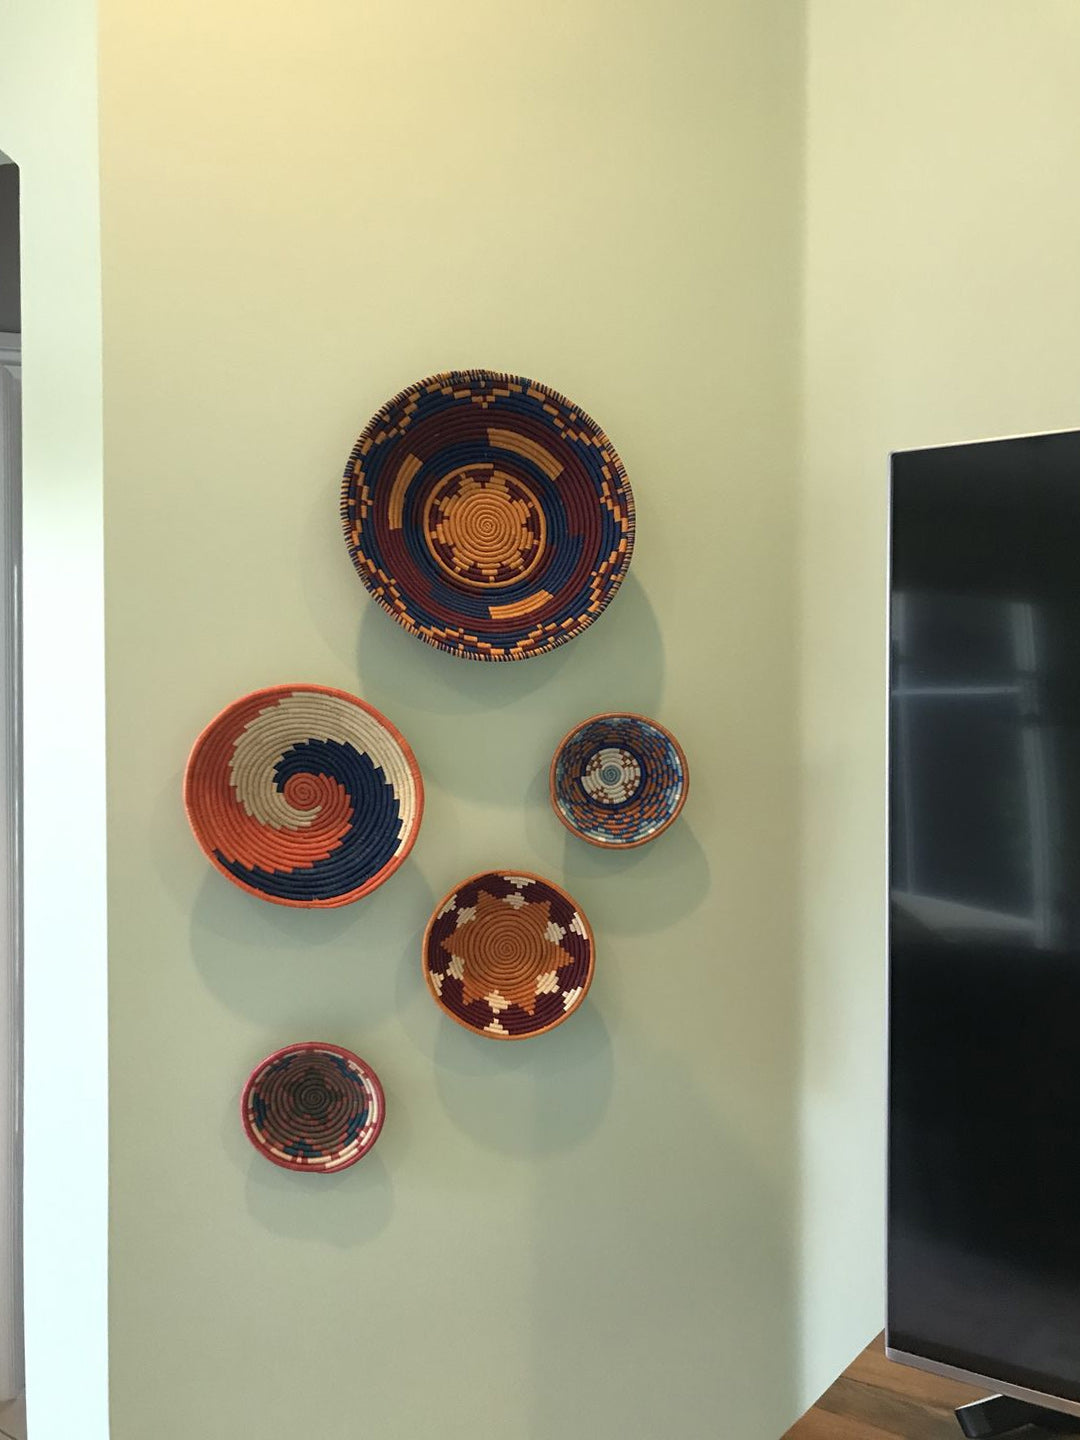 Handmade African Wall Baskets for Home Decor